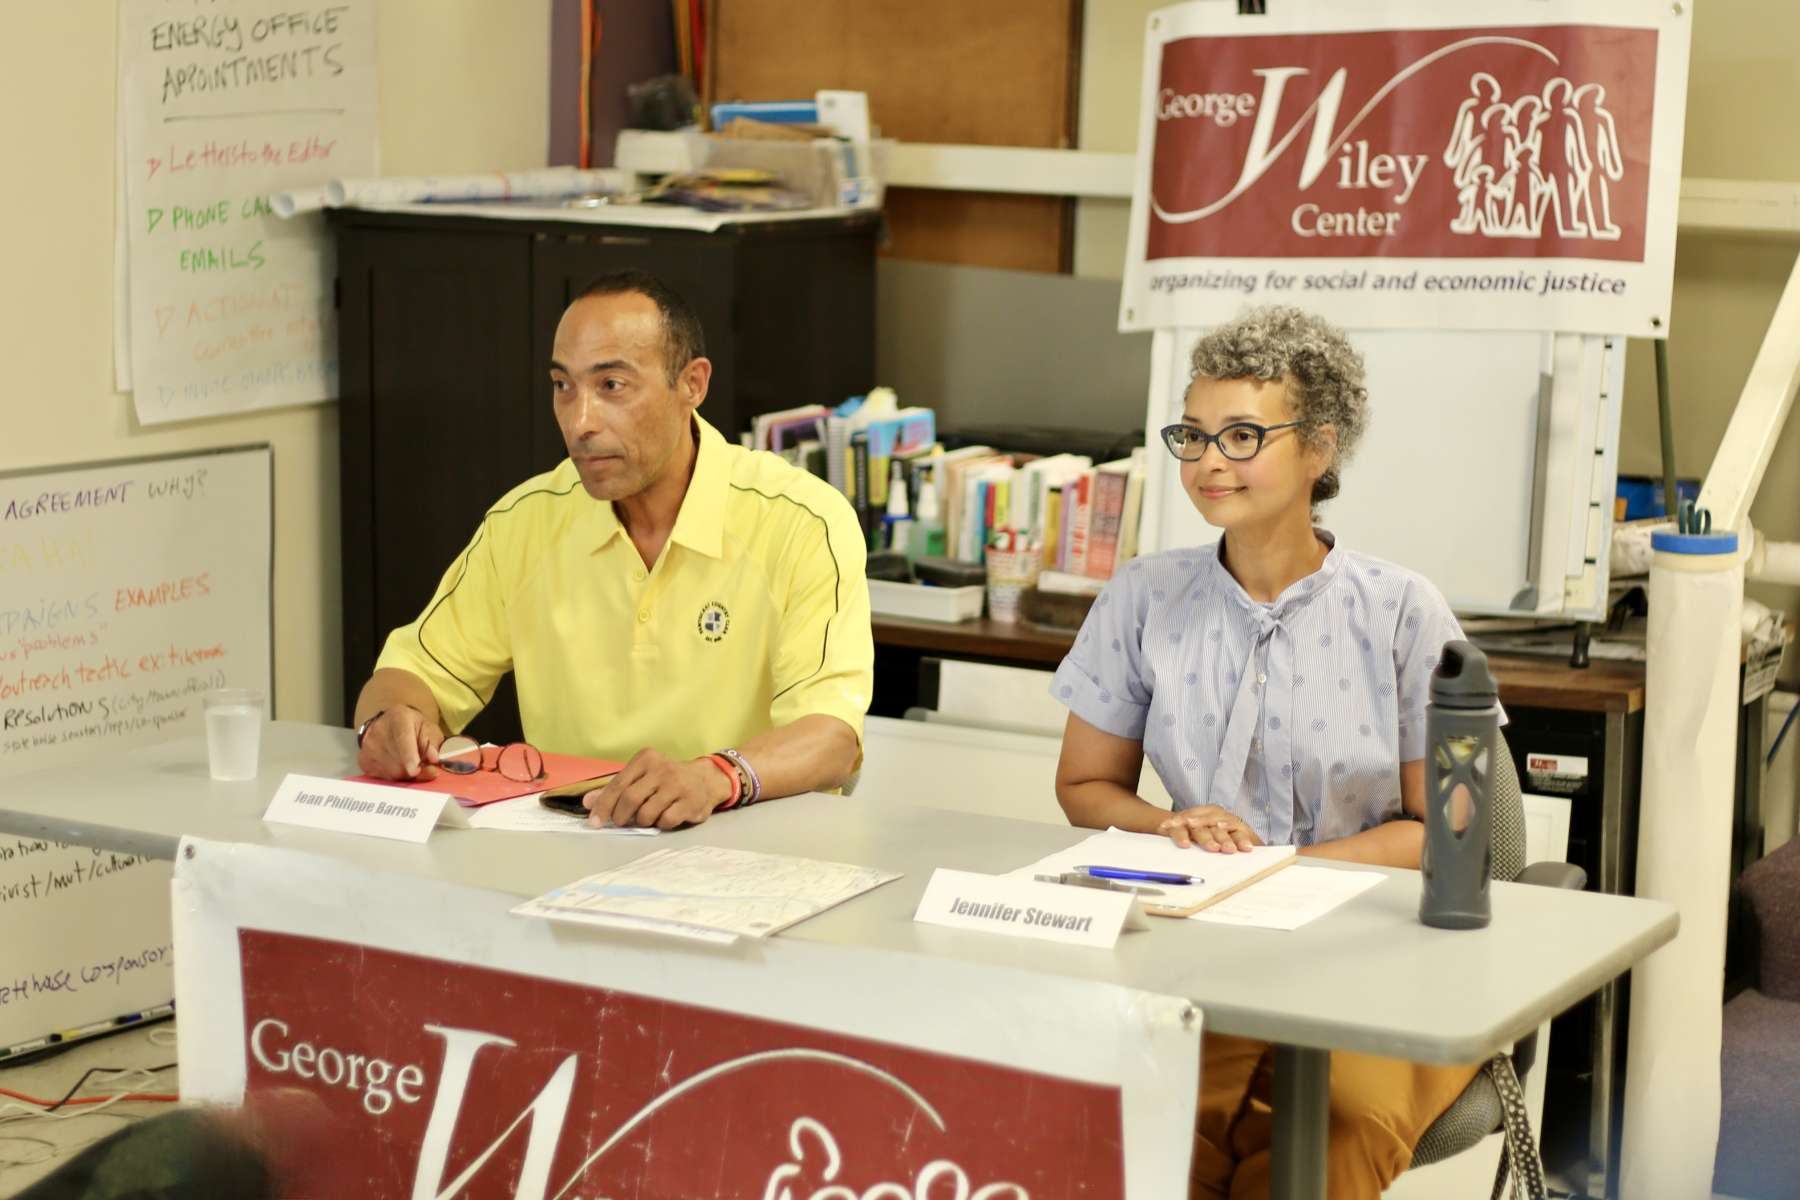 Rhode Island News: Pawtucket Rep Barros and challenger Jennifer Stewart tackle the hard questions at GWC public forum